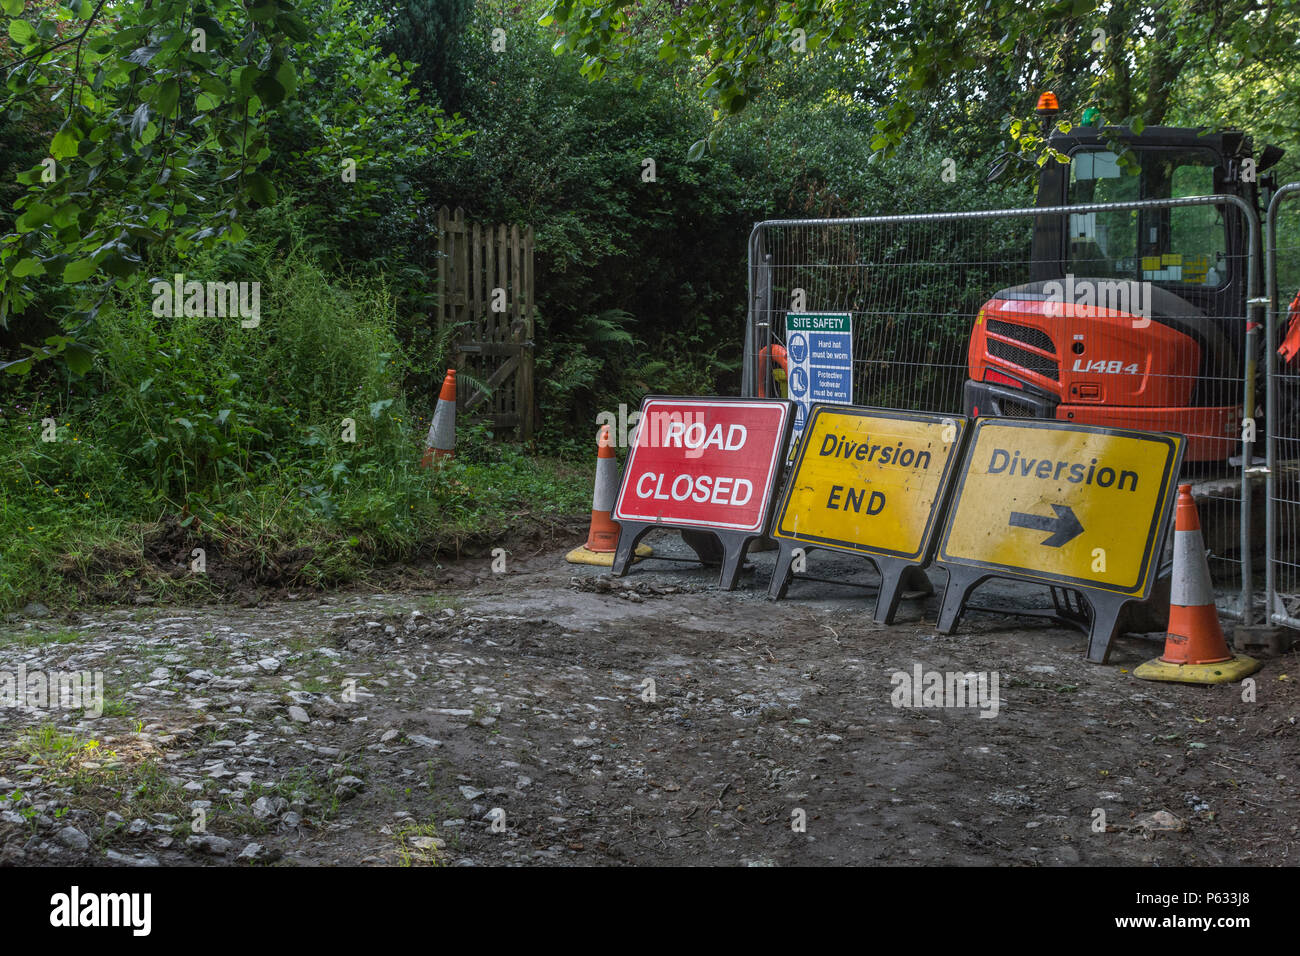 Road Closed and traffic diversion signs near a woodland shaded area. Concept roadworks, road works, road maintenance, temporary road closure. Stock Photo